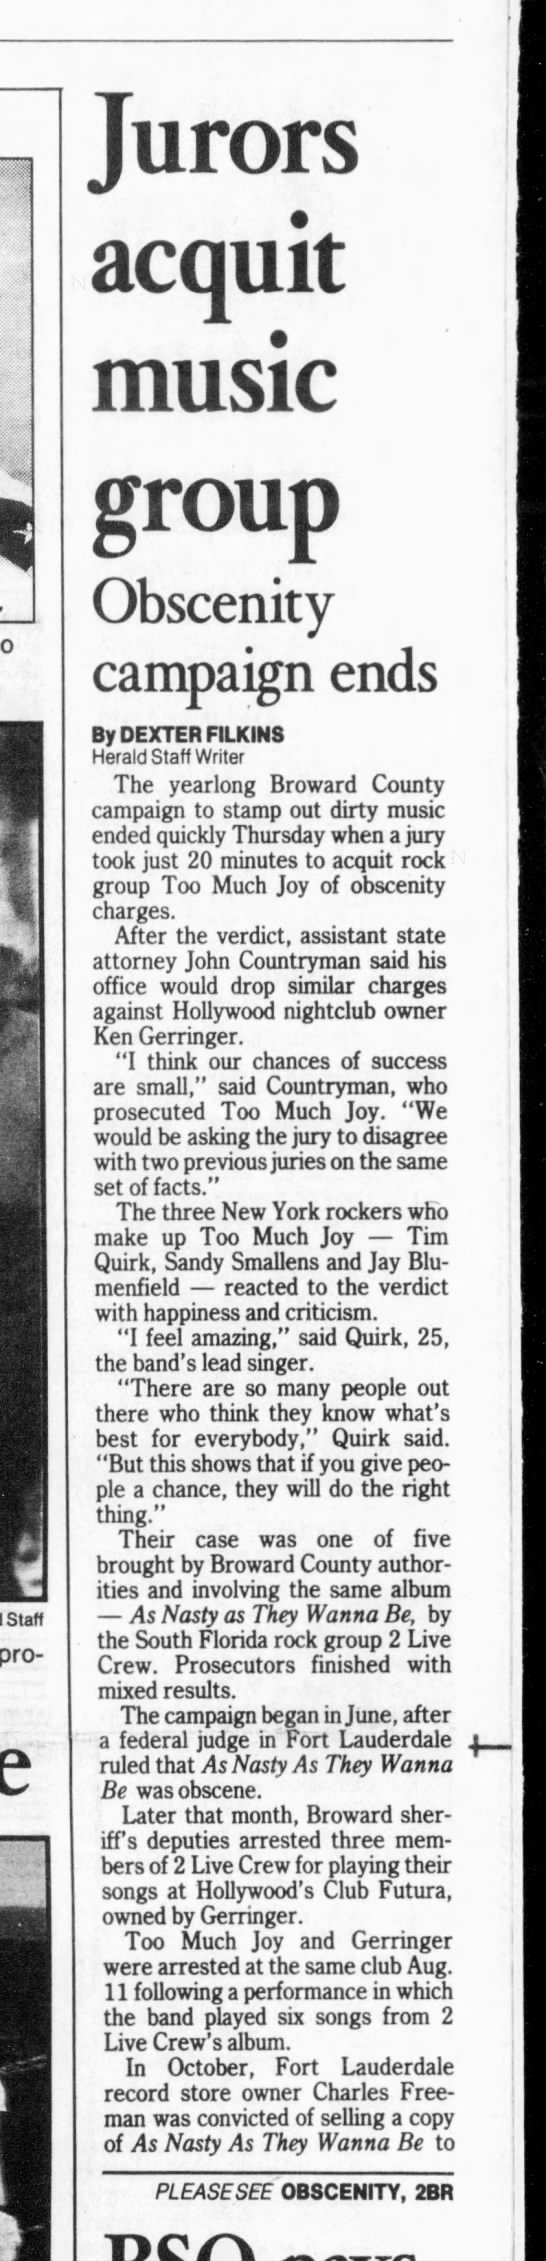 Too Much Joy acquitted of obscenity for performing 2 Live Crew songs, Miami Herald, 18 Jan 1991 - 